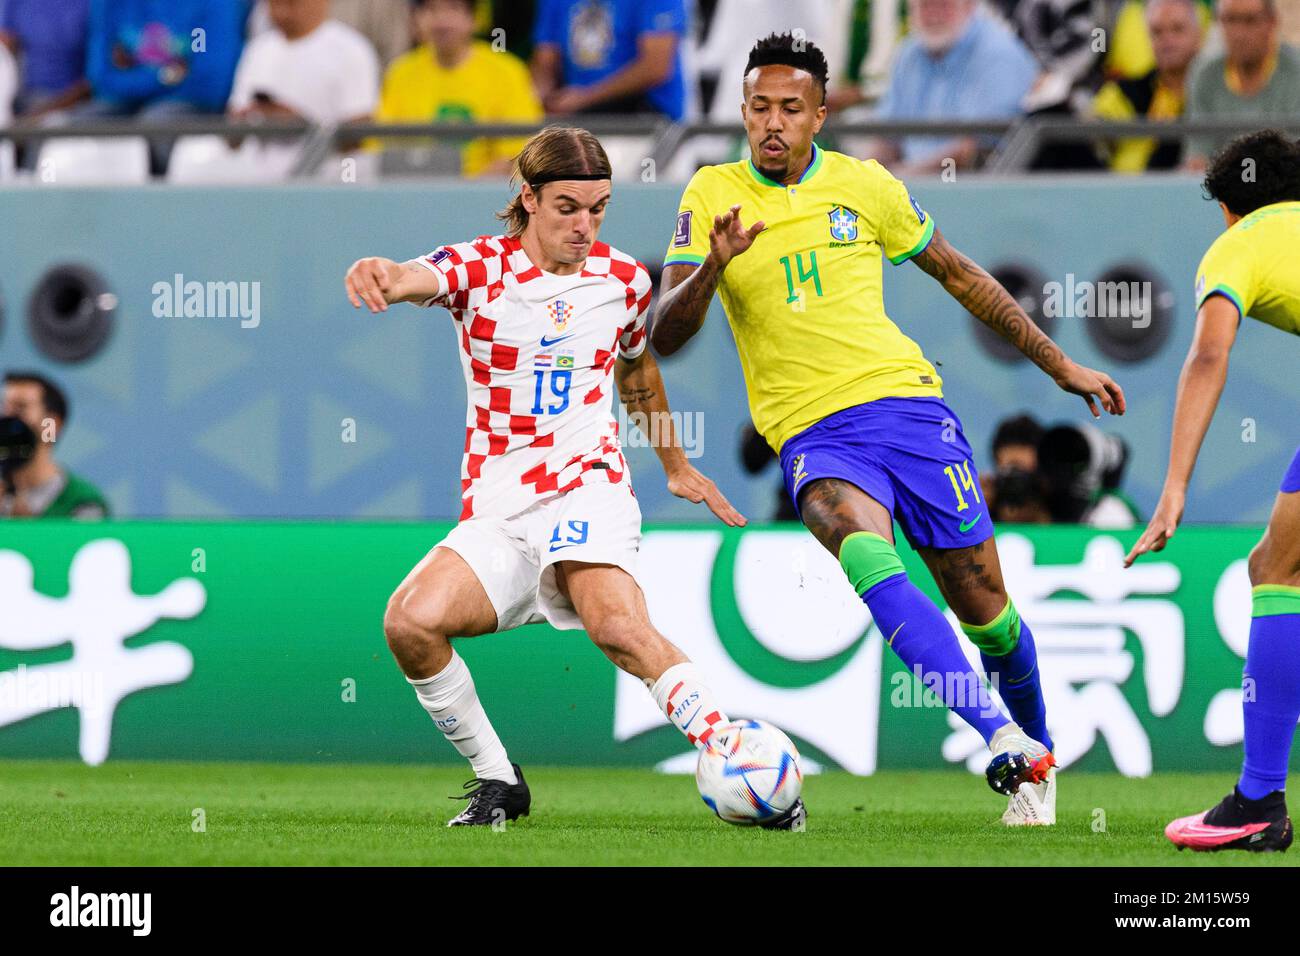 Doha, Qatar. 09th Dec, 2022. Education City Stadium Eder Militao of Brazil and Borna Sosa of Croatia during the match between Croatia and Brazil, valid for the quarterfinals of the World Cup, held at the Education City Stadium in Doha, Qatar. (Marcio Machado/SPP) Credit: SPP Sport Press Photo. /Alamy Live News Stock Photo